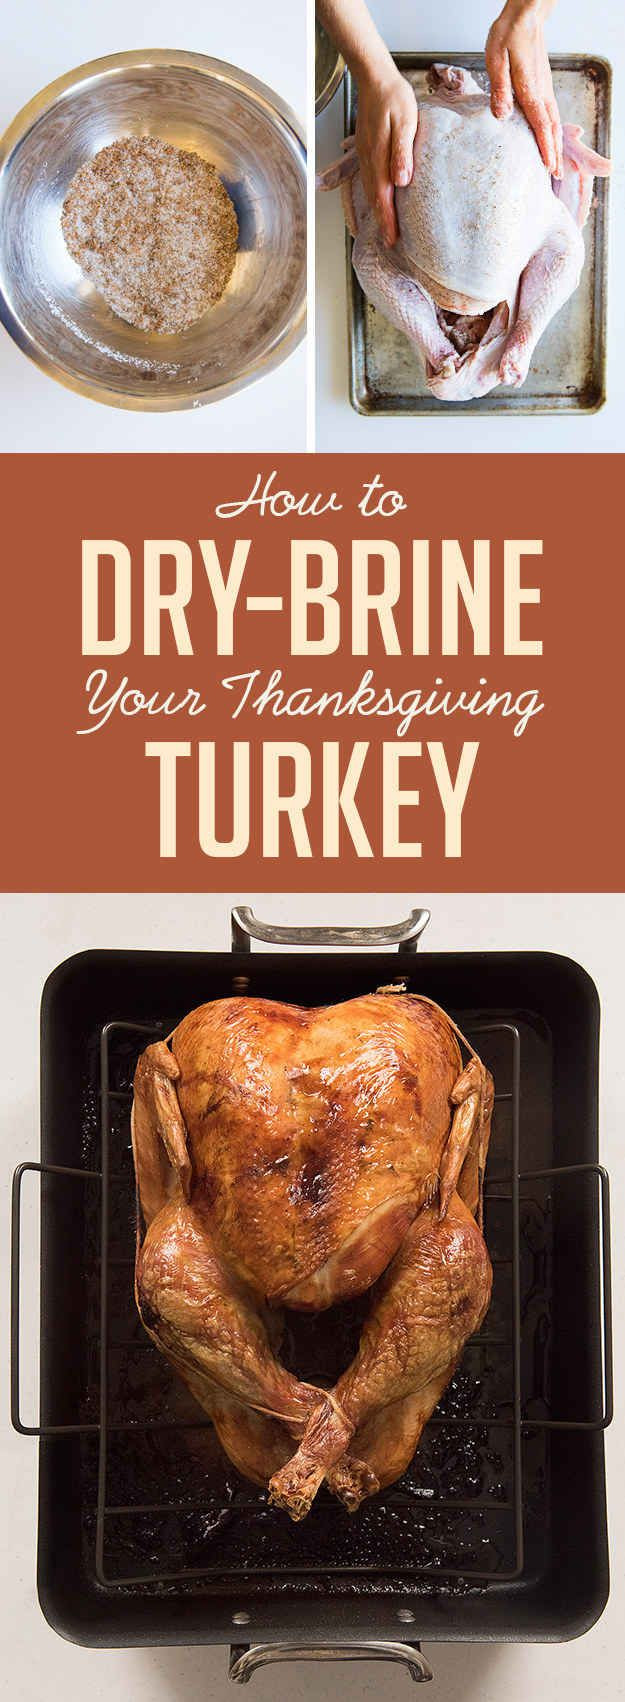 Best Way To Cook Thanksgiving Turkey
 This Is Actually The Best Way To Make A Turkey For